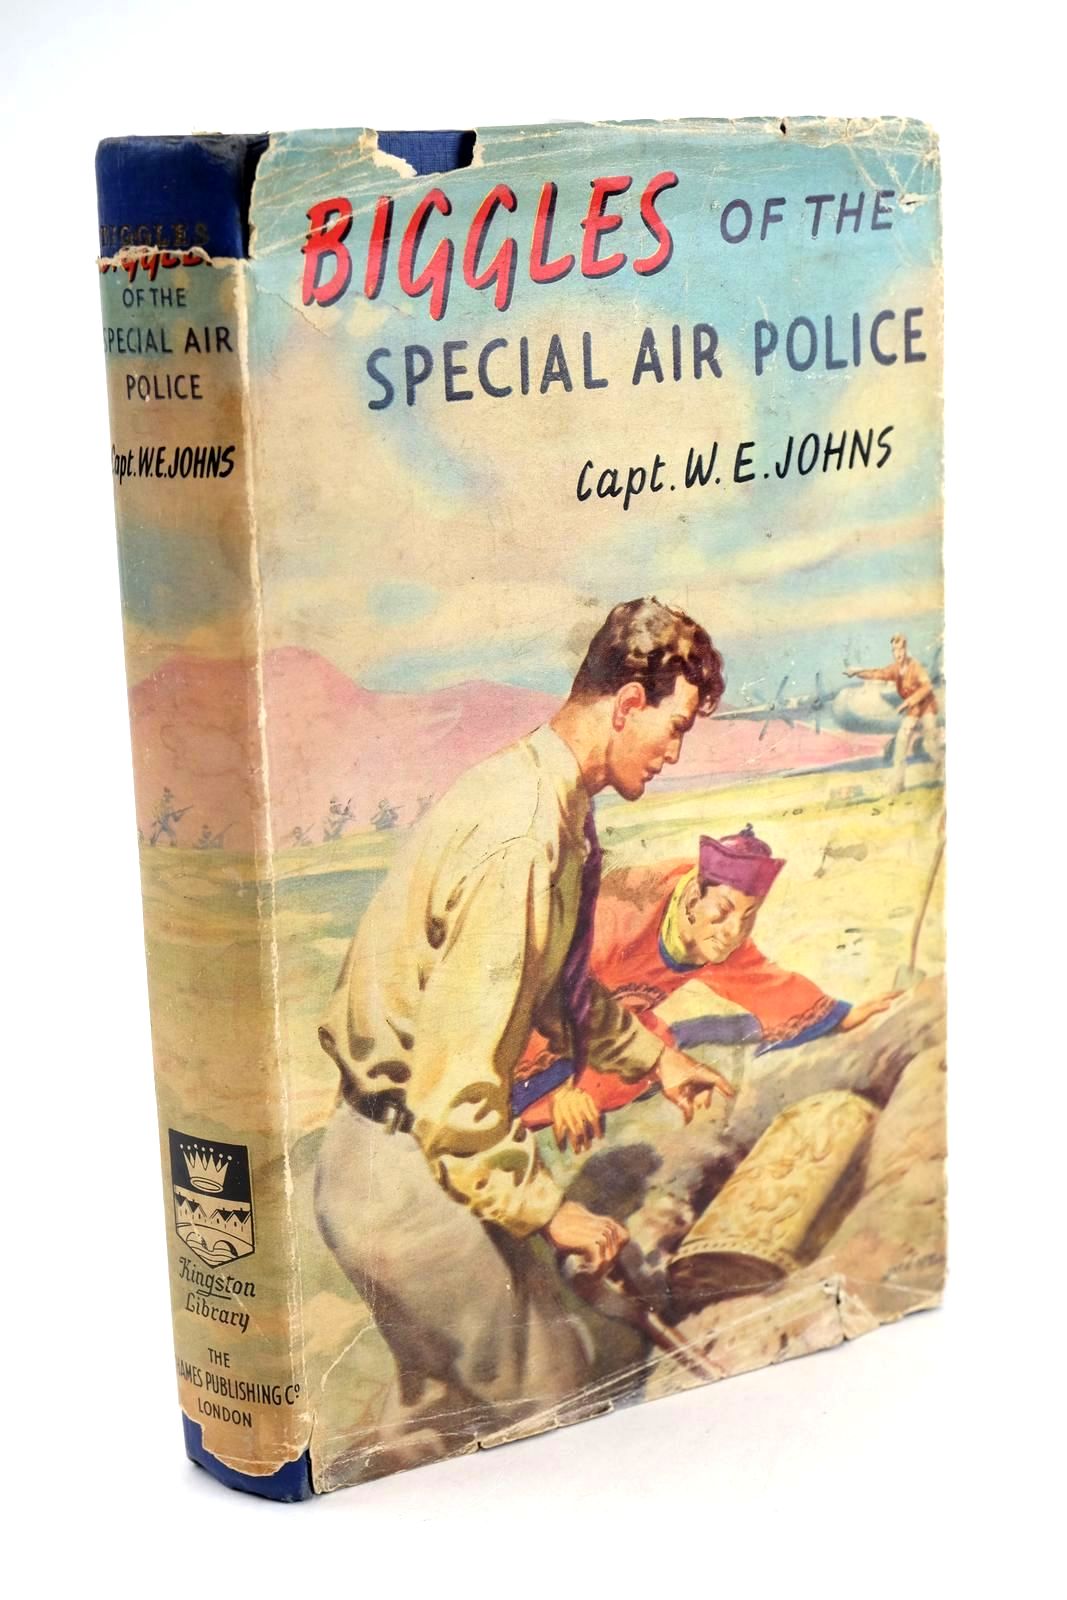 Photo of BIGGLES OF THE SPECIAL AIR POLICE written by Johns, W.E. published by The Thames Publishing Co. (STOCK CODE: 1324102)  for sale by Stella & Rose's Books